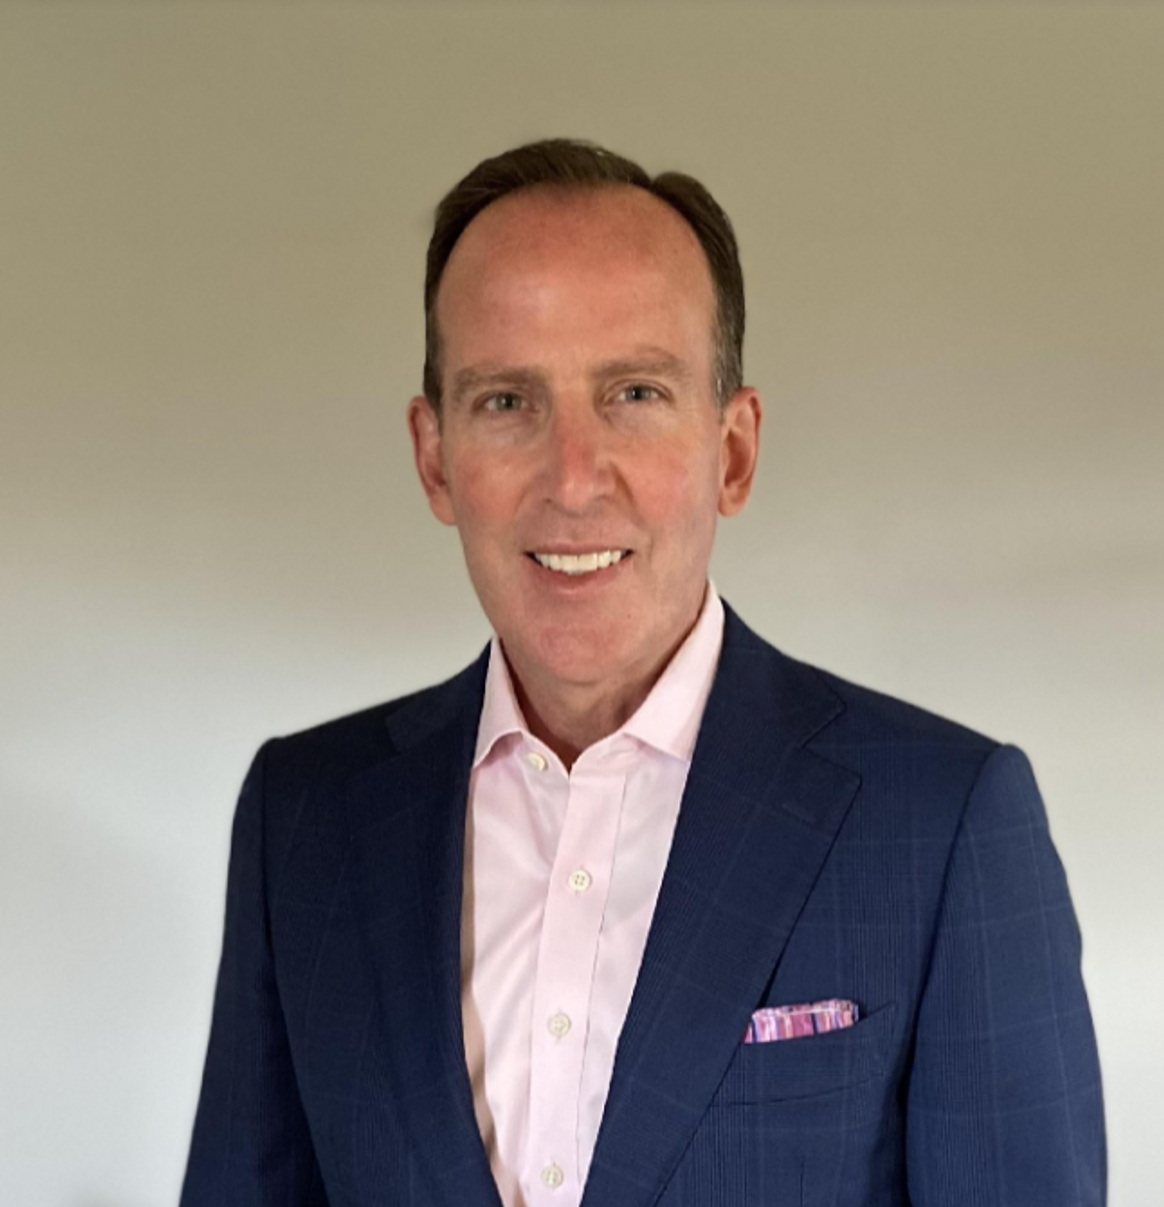 Patrick Donegan, Advisor to Inex One, Senior Managing Director at The Riverside Company and former Managing Director & General Manager of Americas Financial Services at GLG